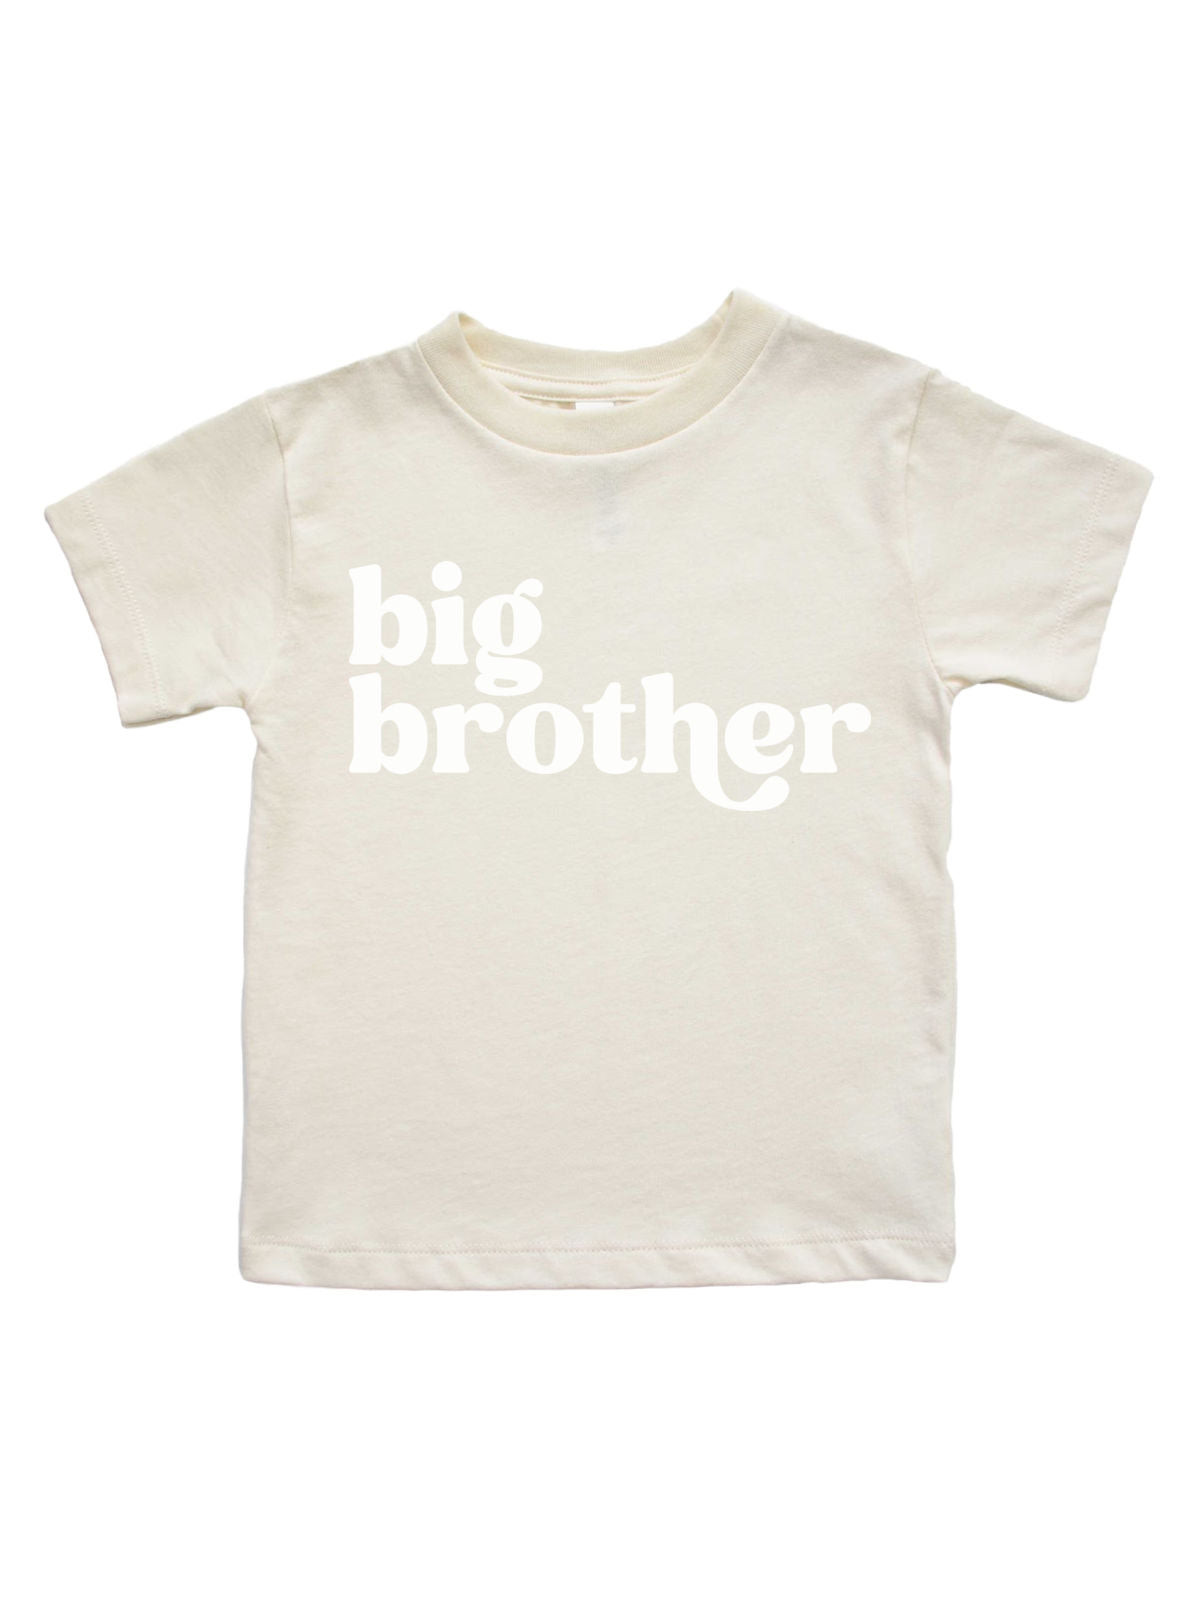 Big Brother Shirt for boys in Natural